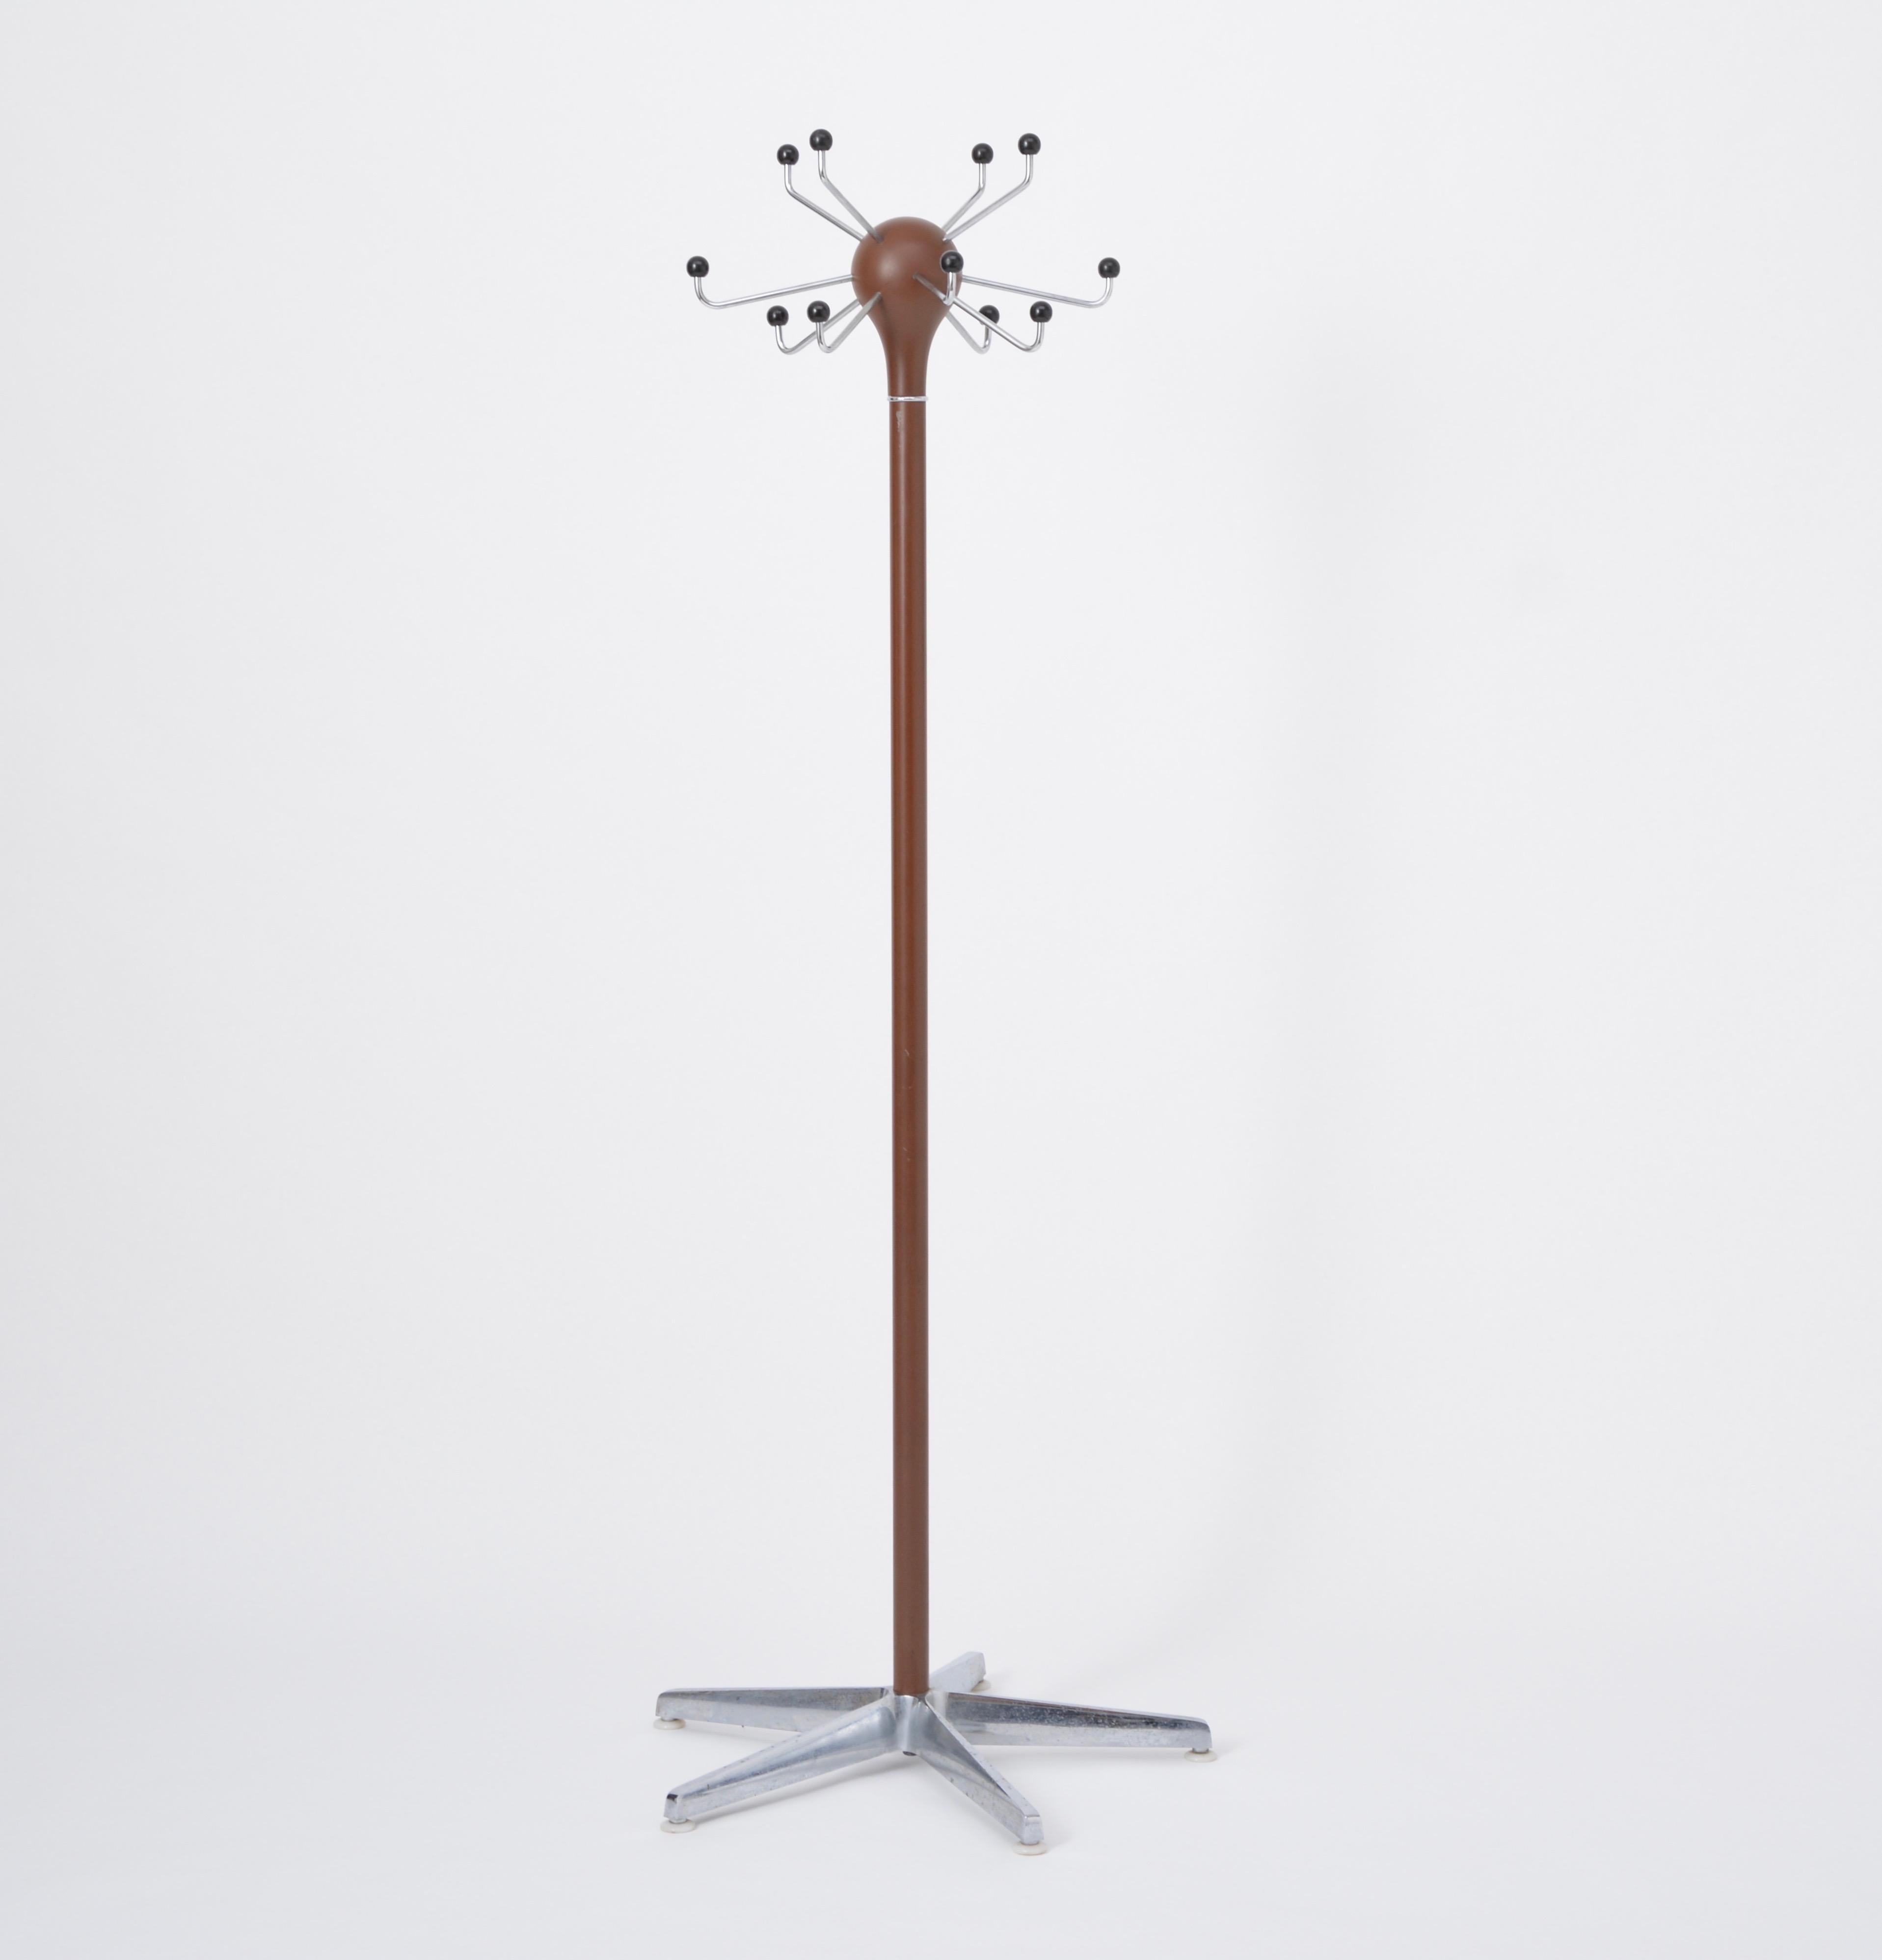 Mid-Century Modern Metal coat rack from Vitra
This coat rack was manufactured by Vitra. It is made from metal and has twelve hooks covered in plastic. The coat rack is in a good vintage condition with some user marks.